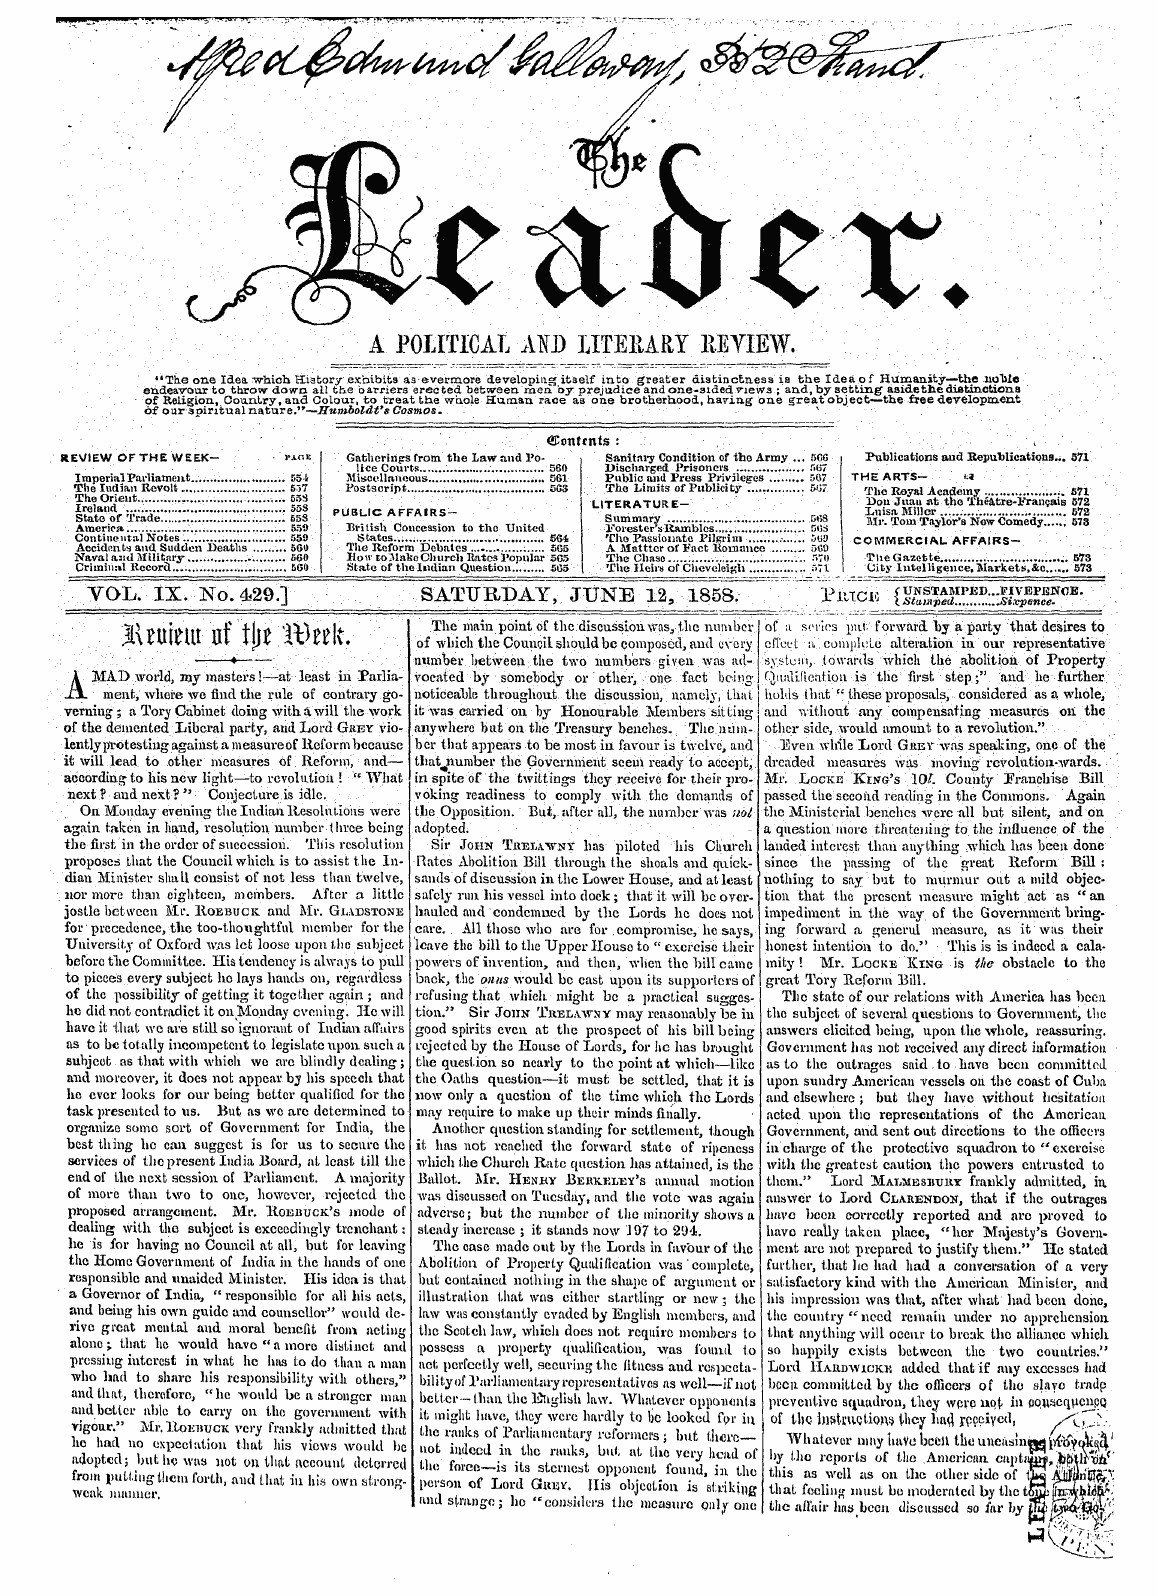 Leader (1850-1860): jS F Y, 2nd edition: 1